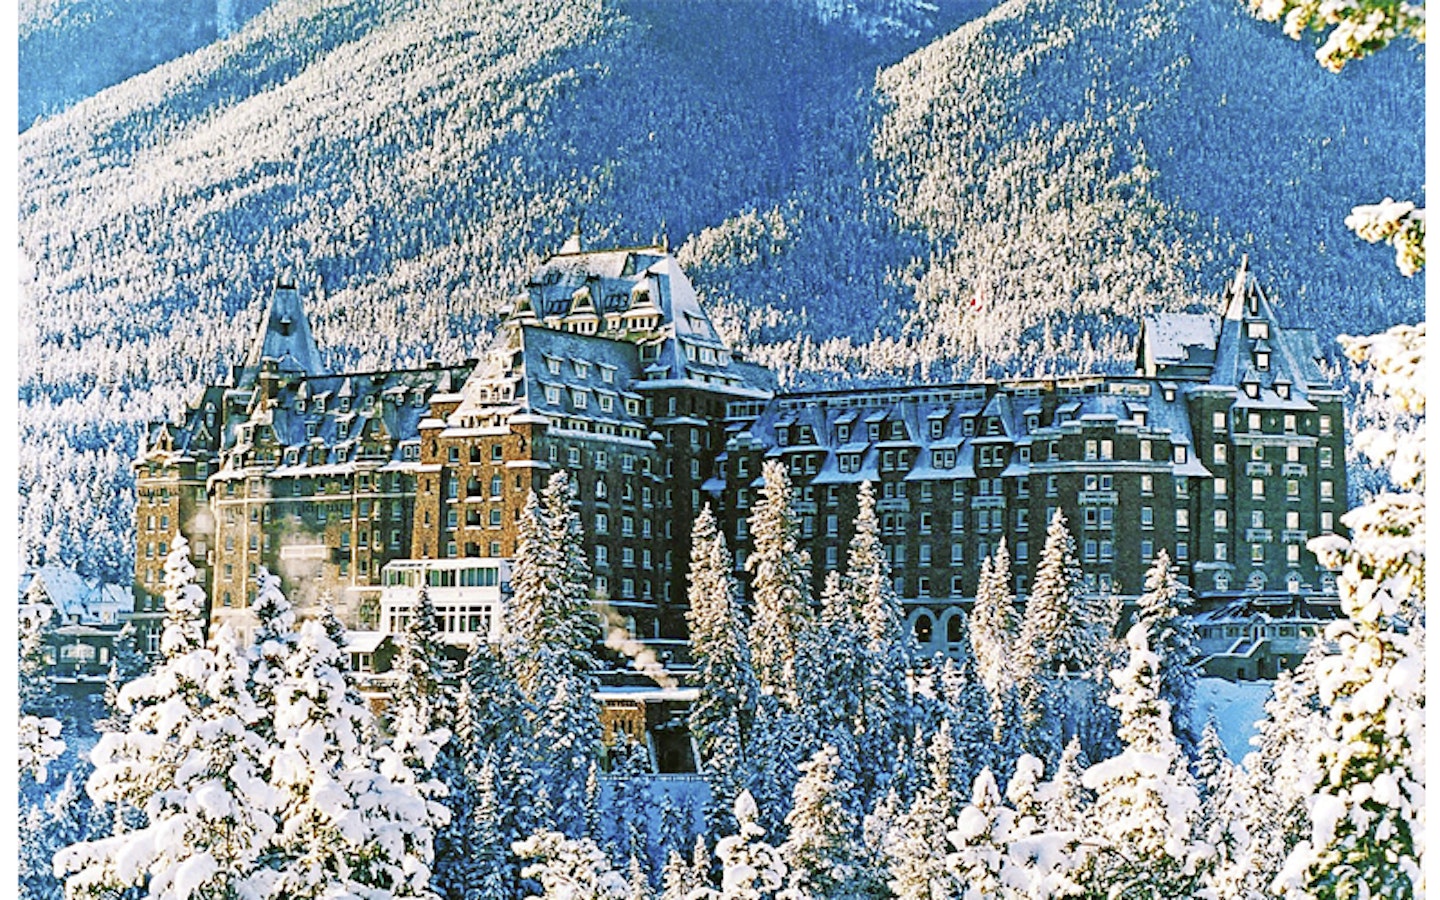 The Faimont Banff Springs